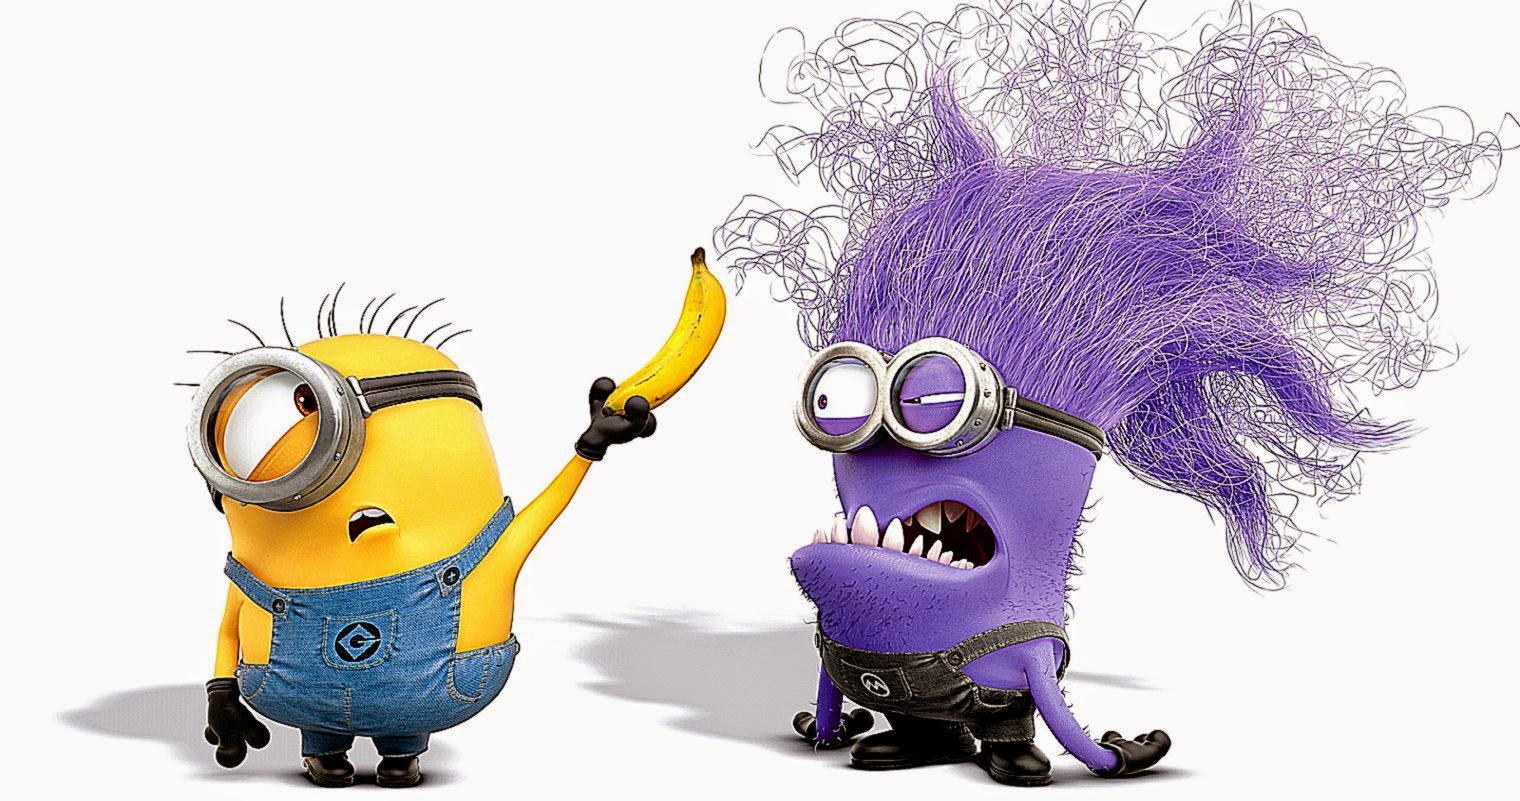 Funny Minion  Wallpaper  High Definitions Wallpapers 